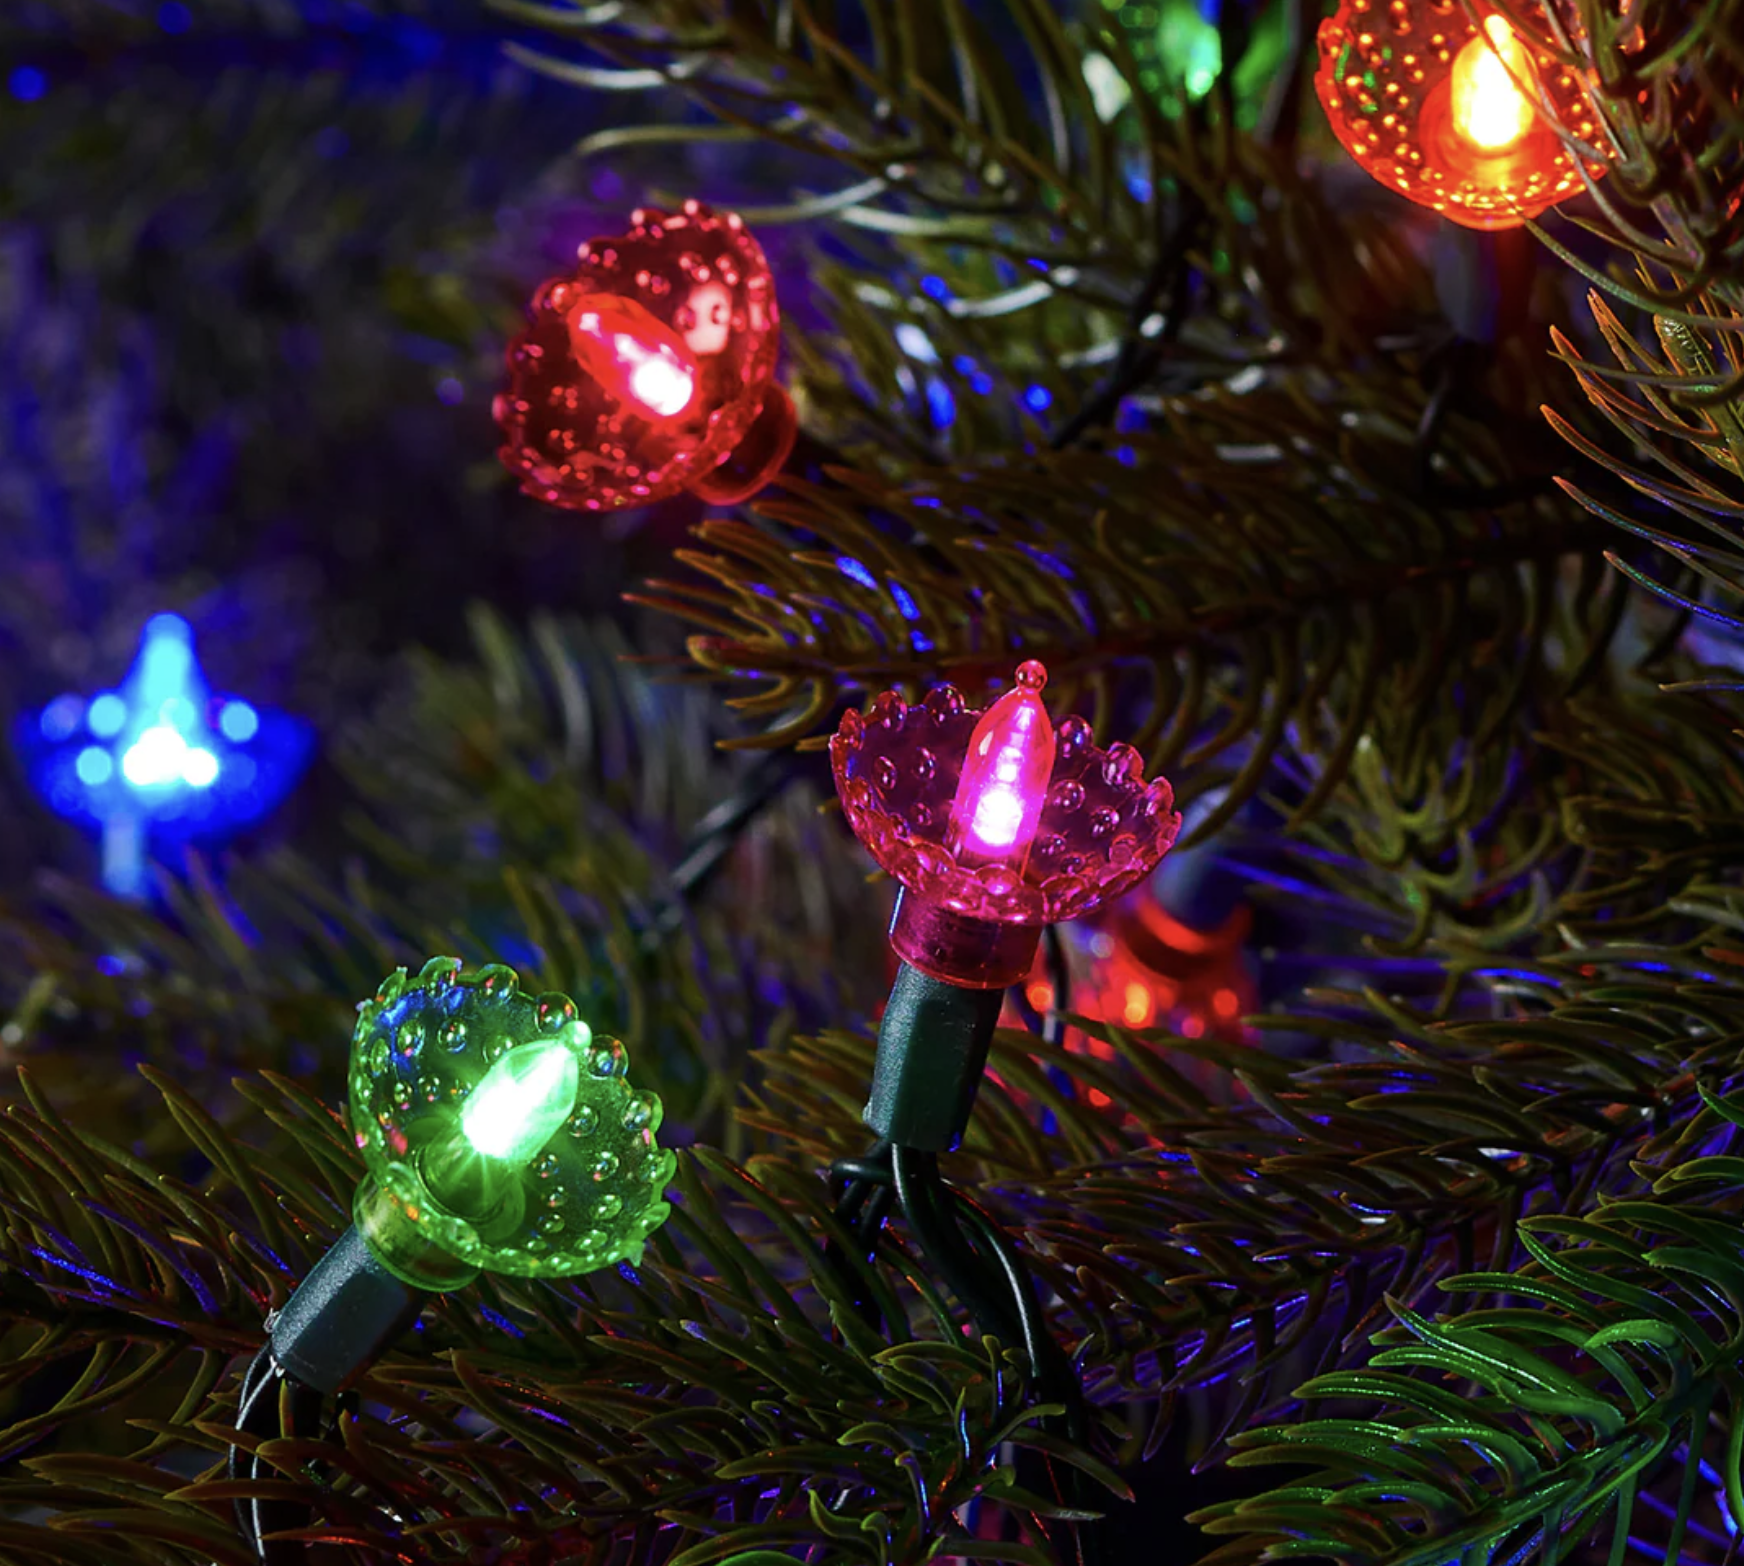 150 multi coloured LED tree lights, £39.99 from lights4fun.co.uk